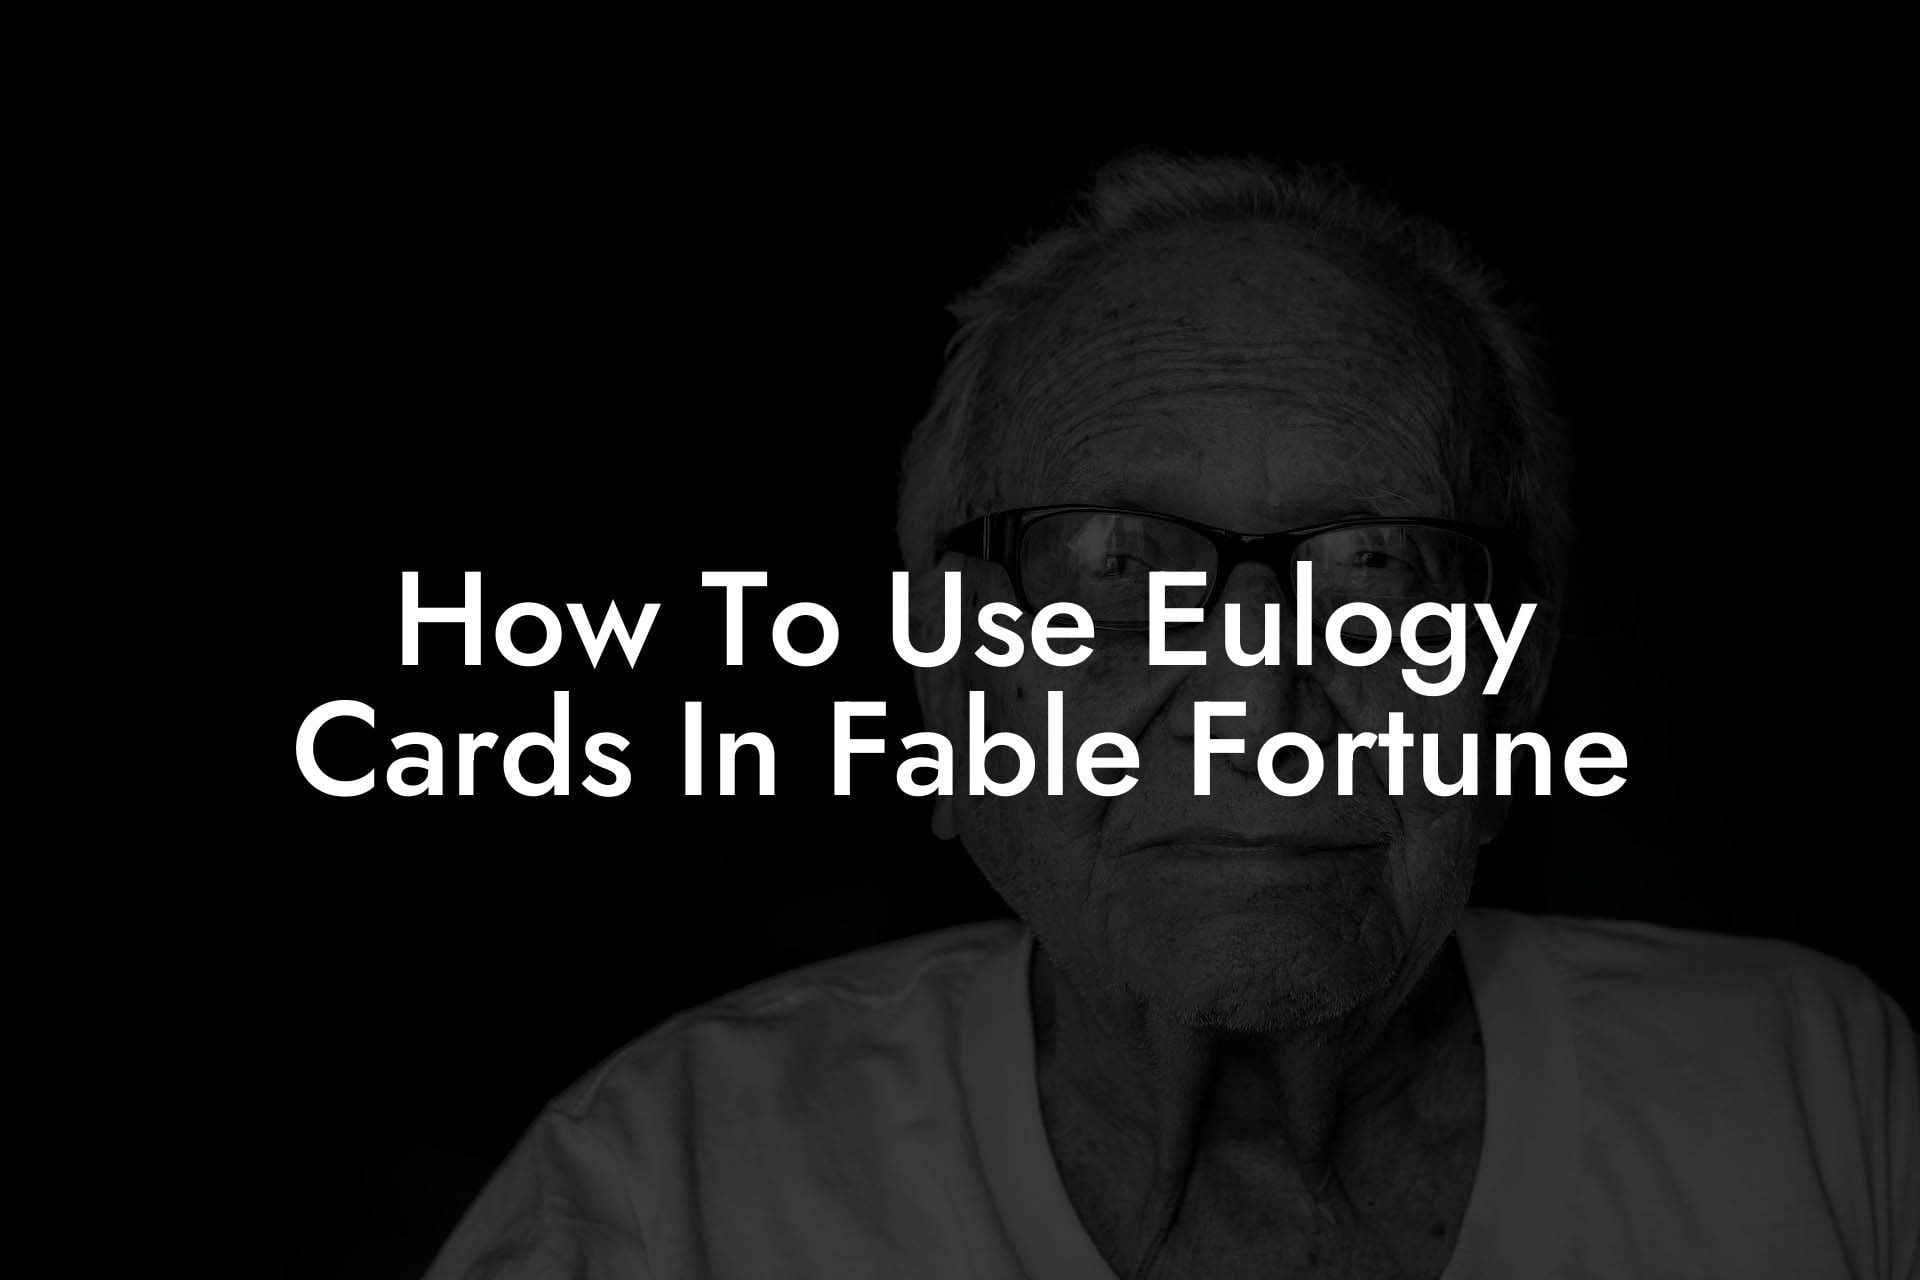 How To Use Eulogy Cards In Fable Fortune